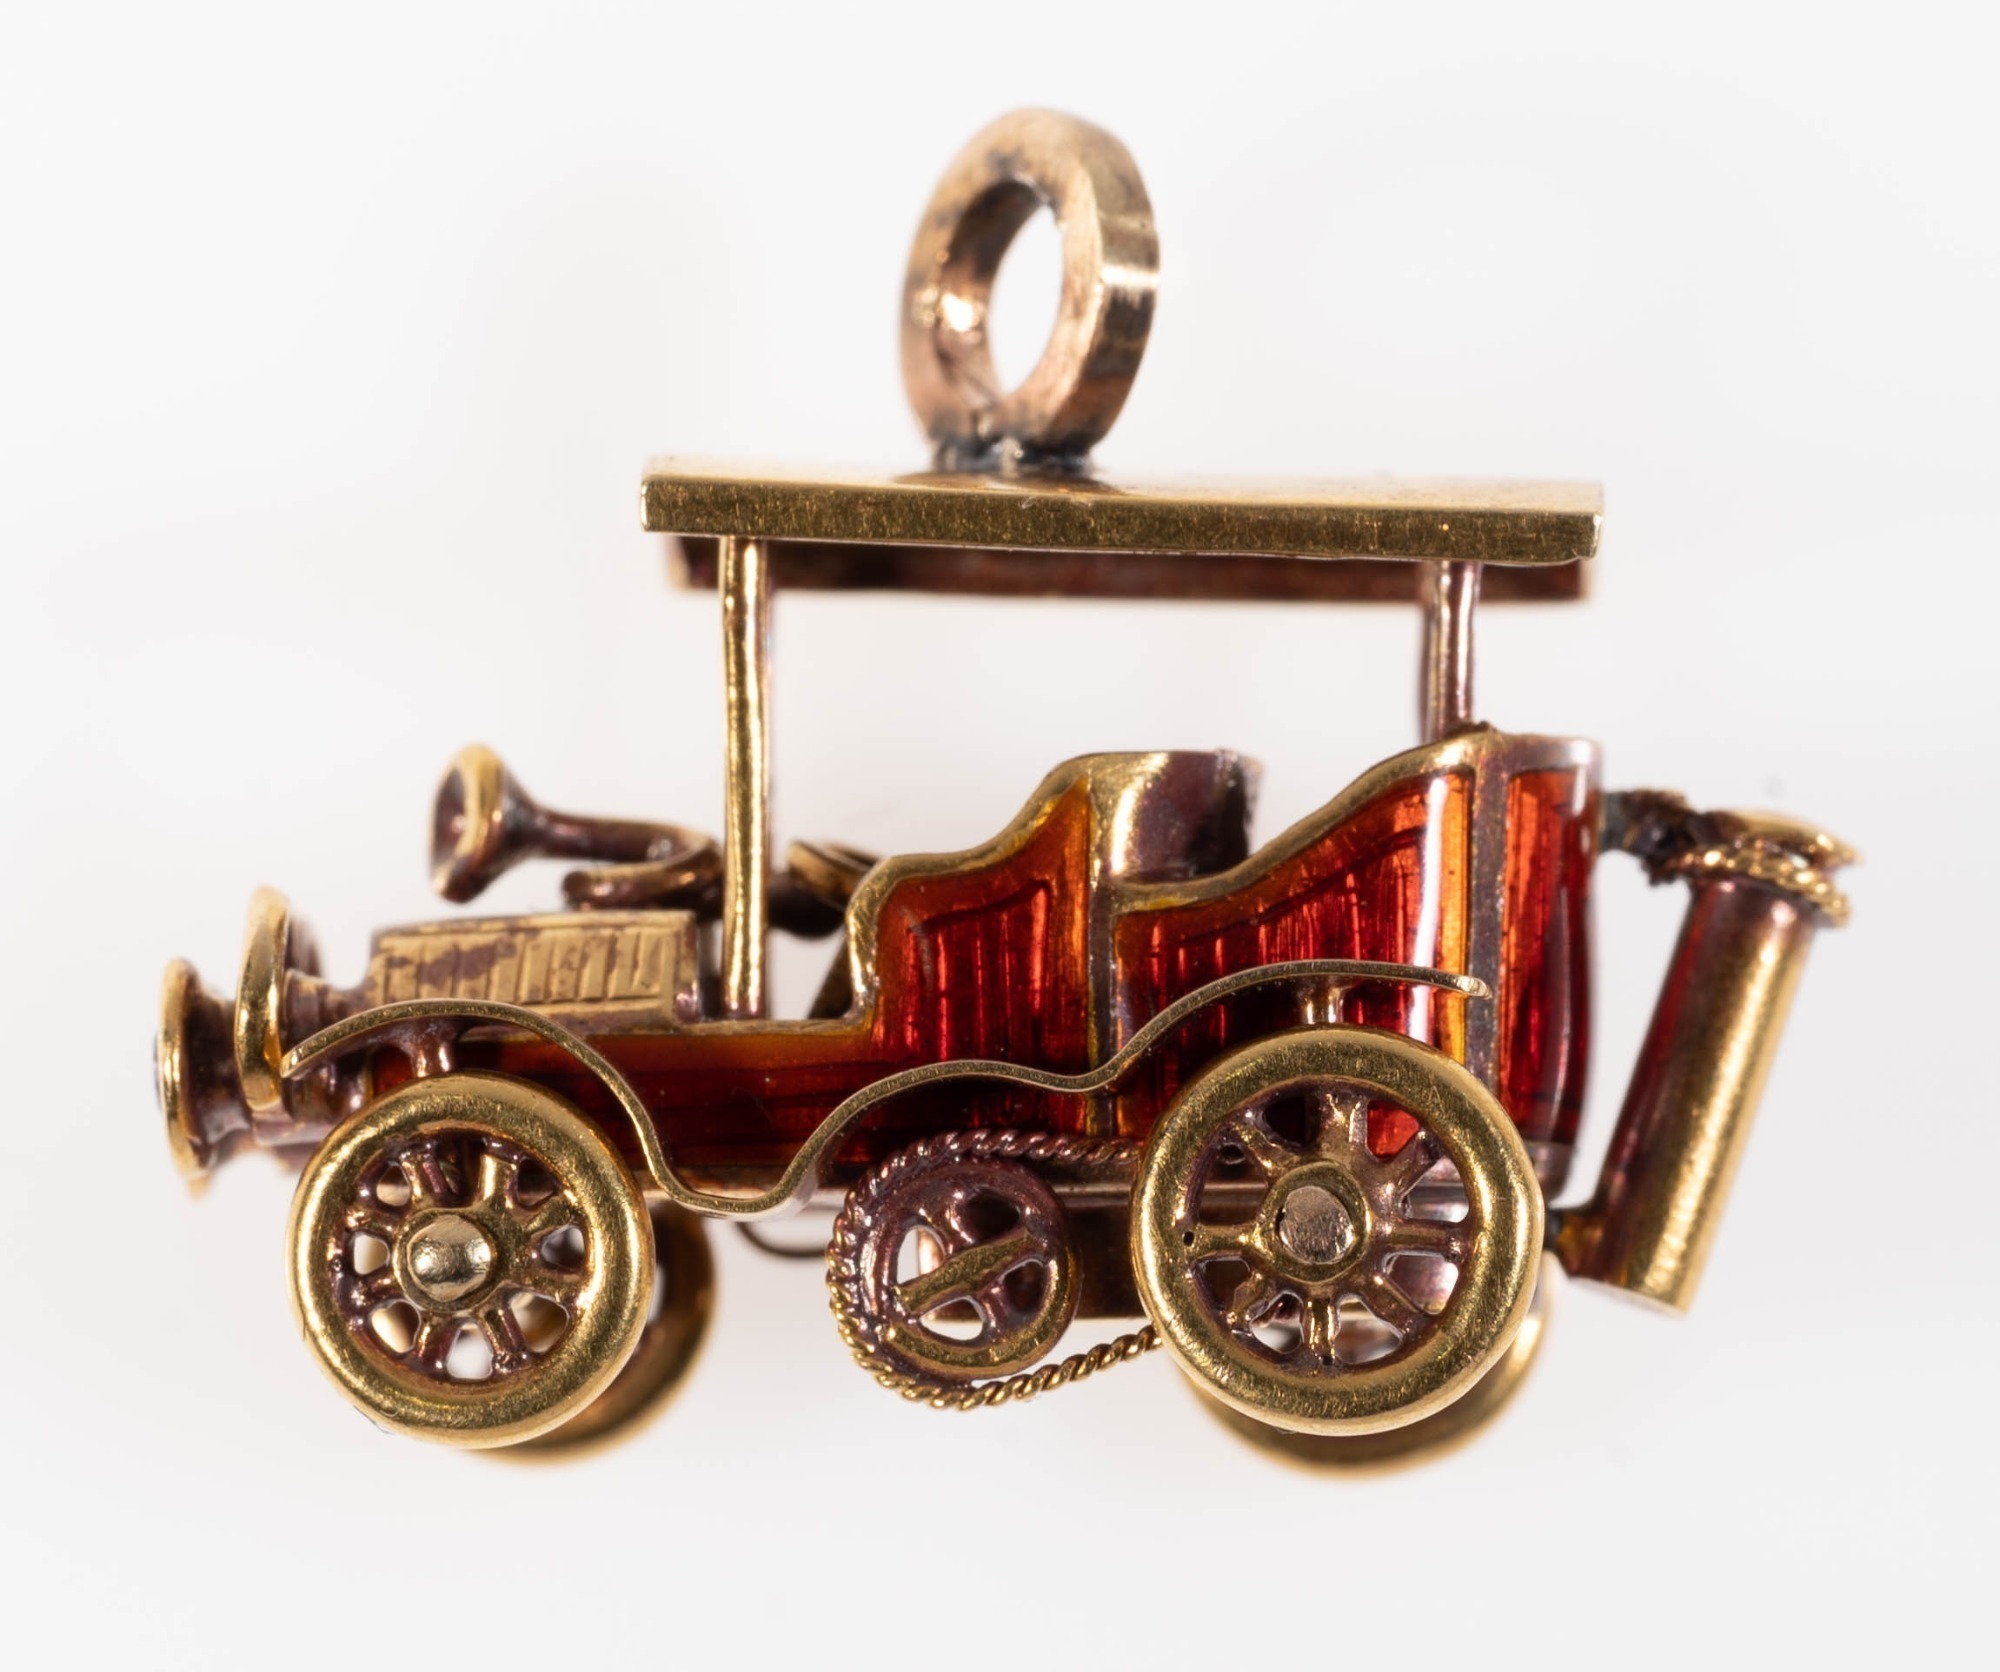 14K GOLD ENAMEL AND RUBY 3 DIMENSIONAL EARLY AUTOMOBILE CHARM